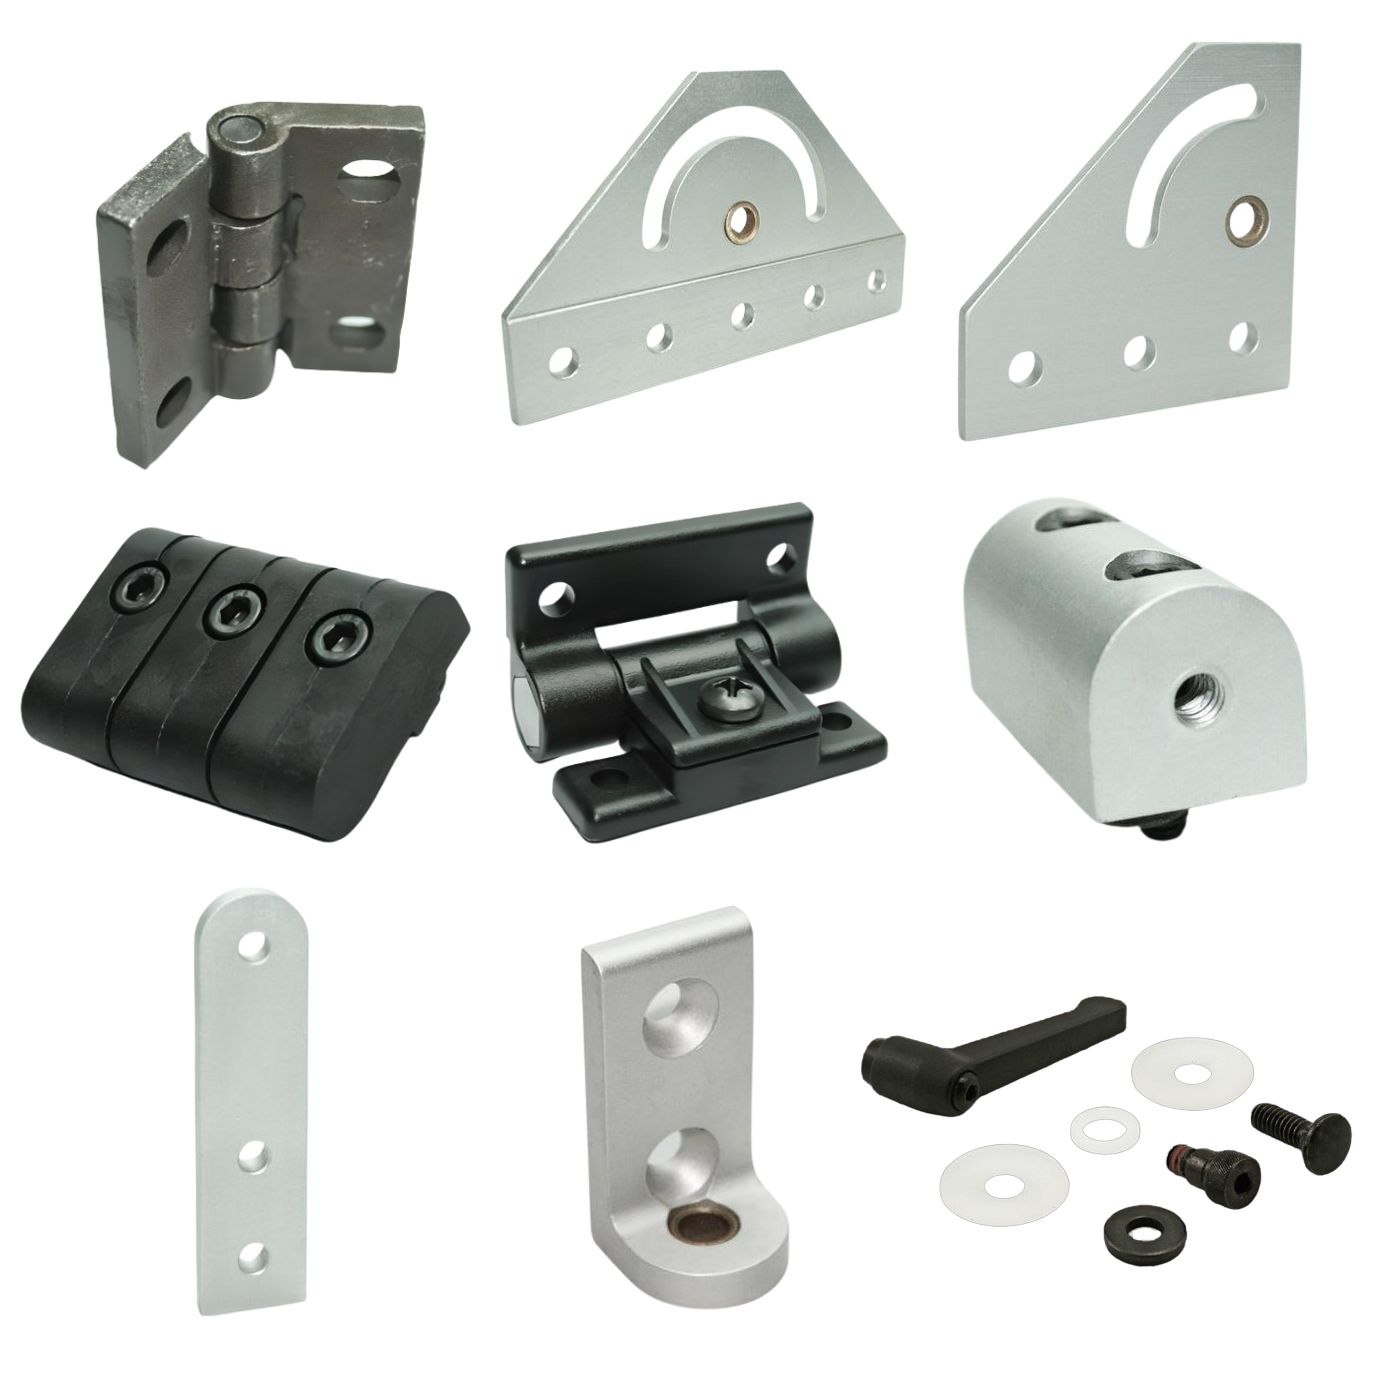 15 Series Hinges and Pivots